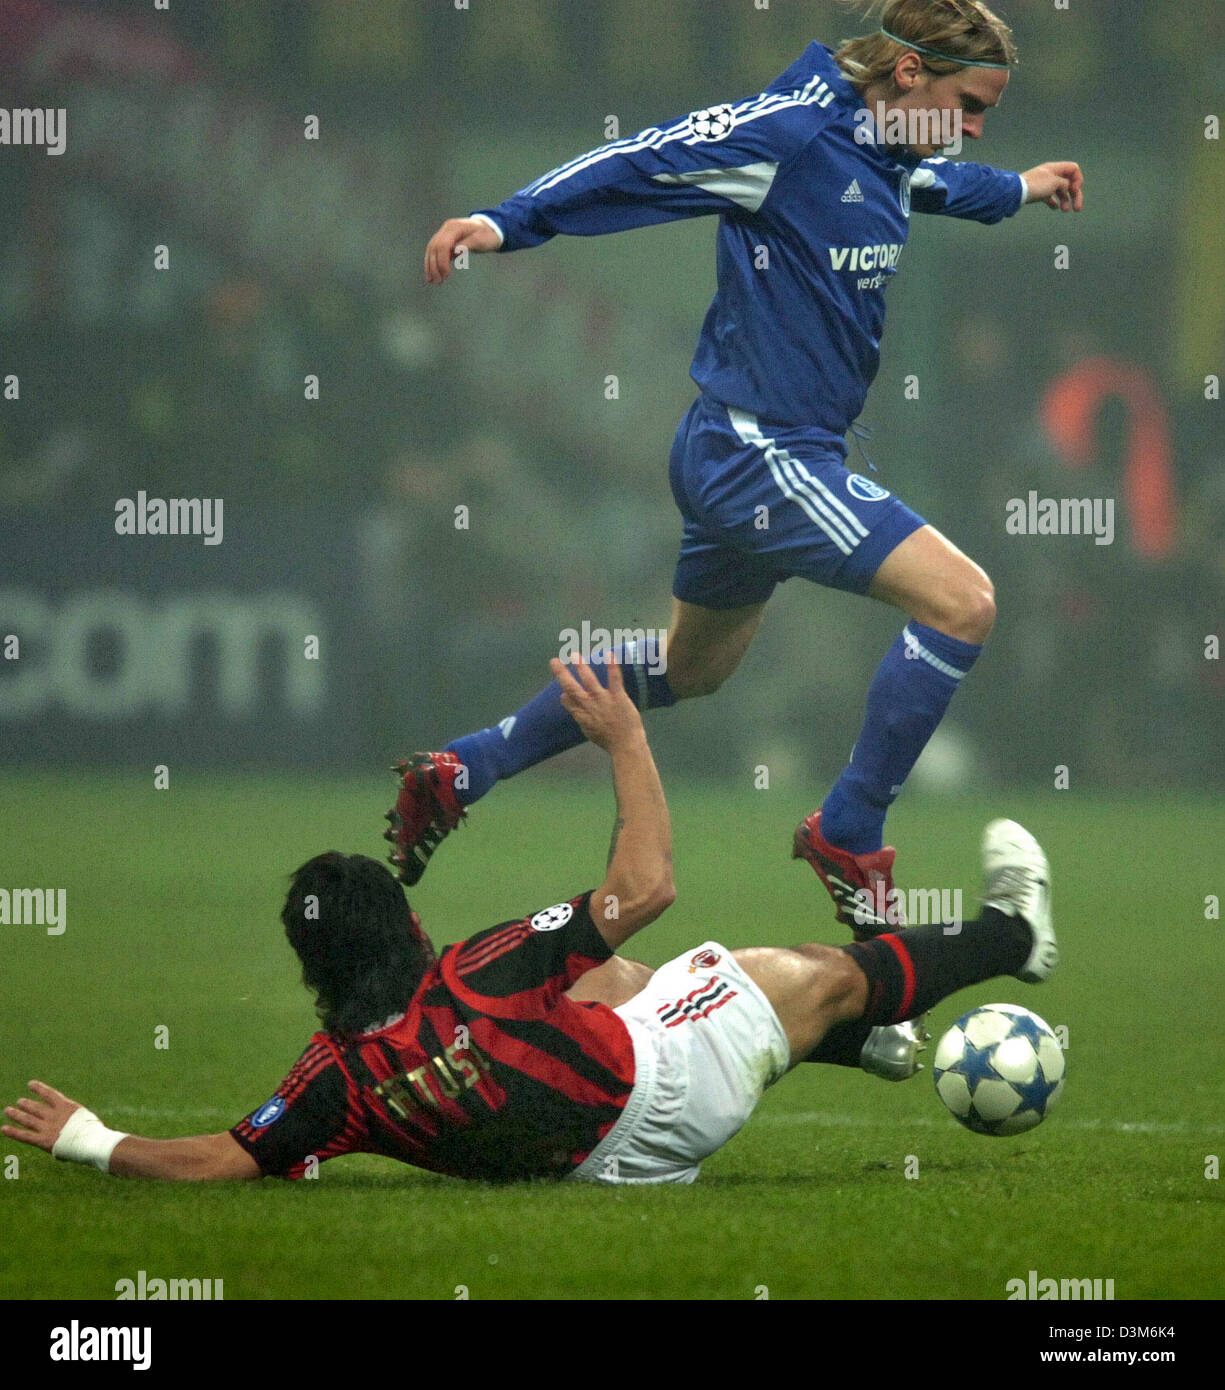 Philadelphia mærke med uret dpa) - FC Schalke 04 midfielder Christian Poulsen (top) is tackled by AC  Milan's Gennaro Gattuso during the UEFA Champions League first round final  match against AC Milan at the Guiseppe Meazza